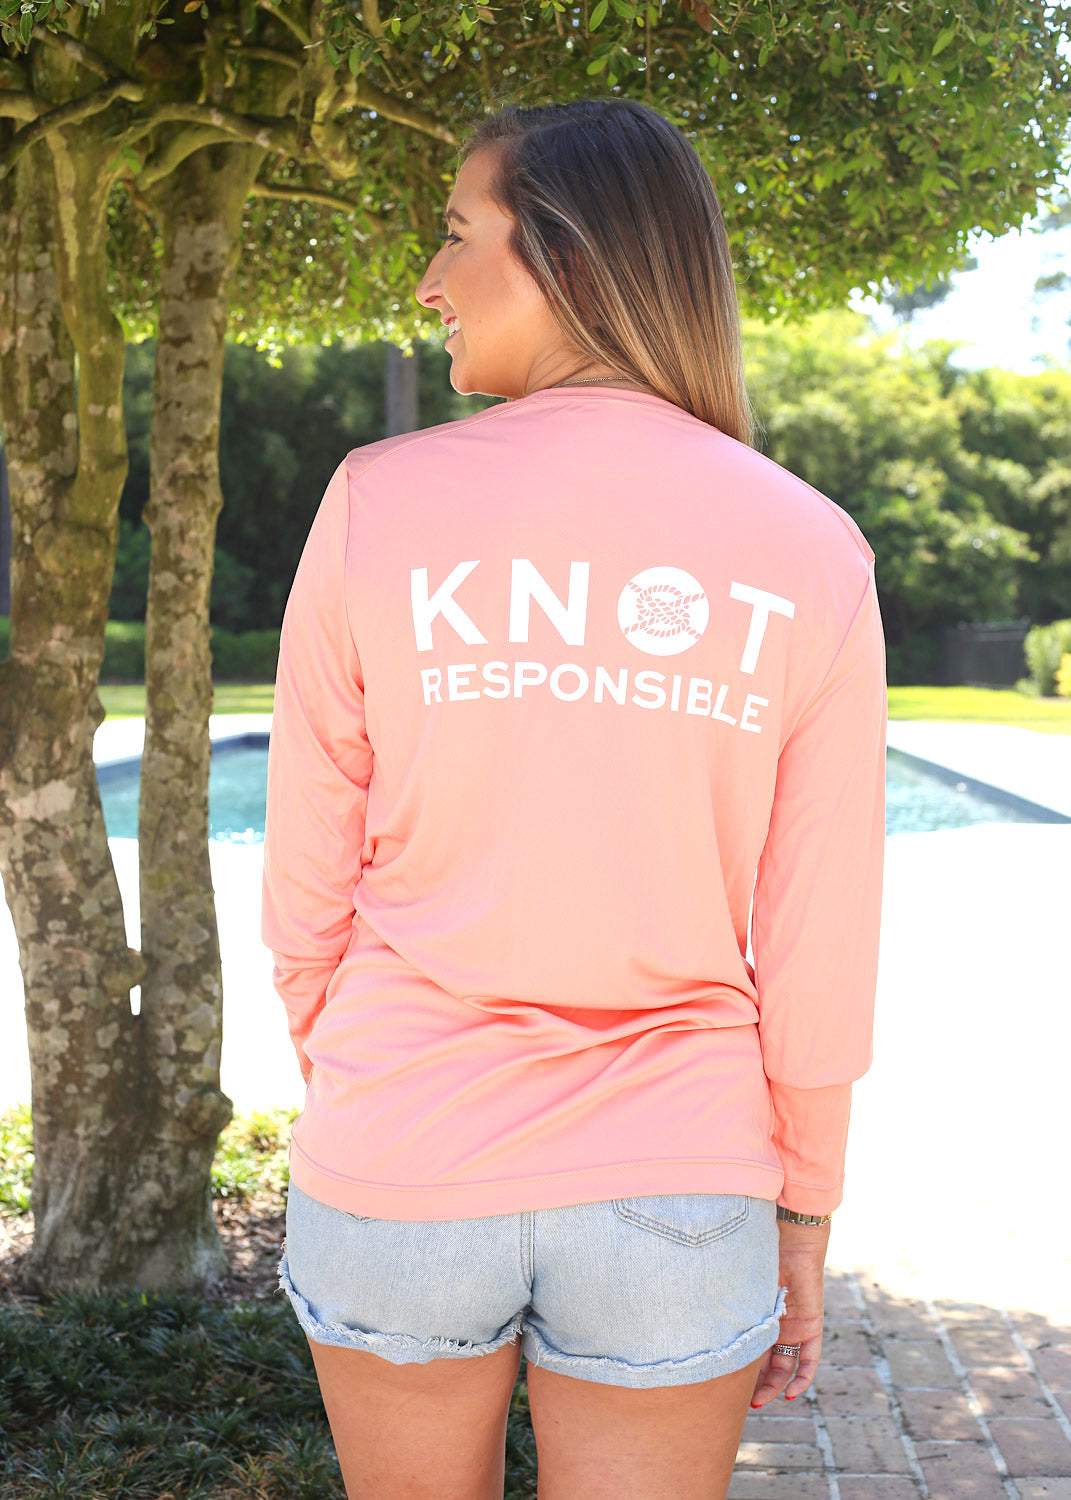 Knot Responsible - Home